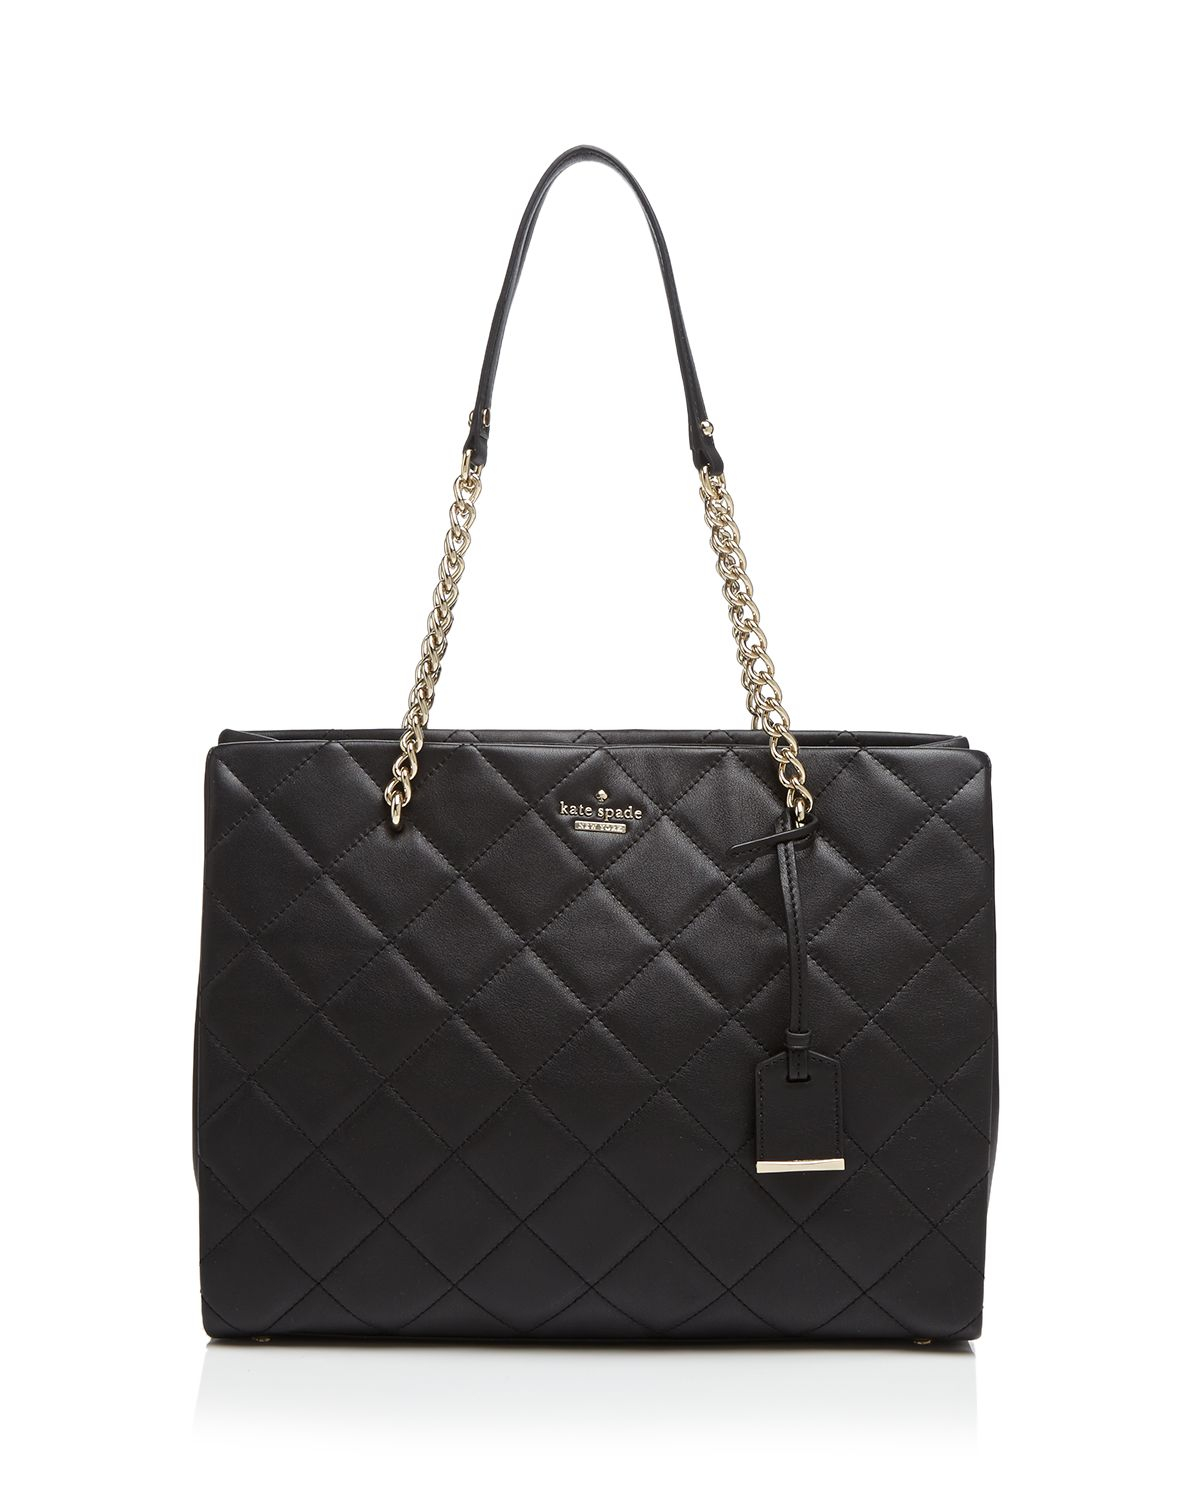 Lyst - Kate spade Emerson Place Phoebe Quilted Tote in Black